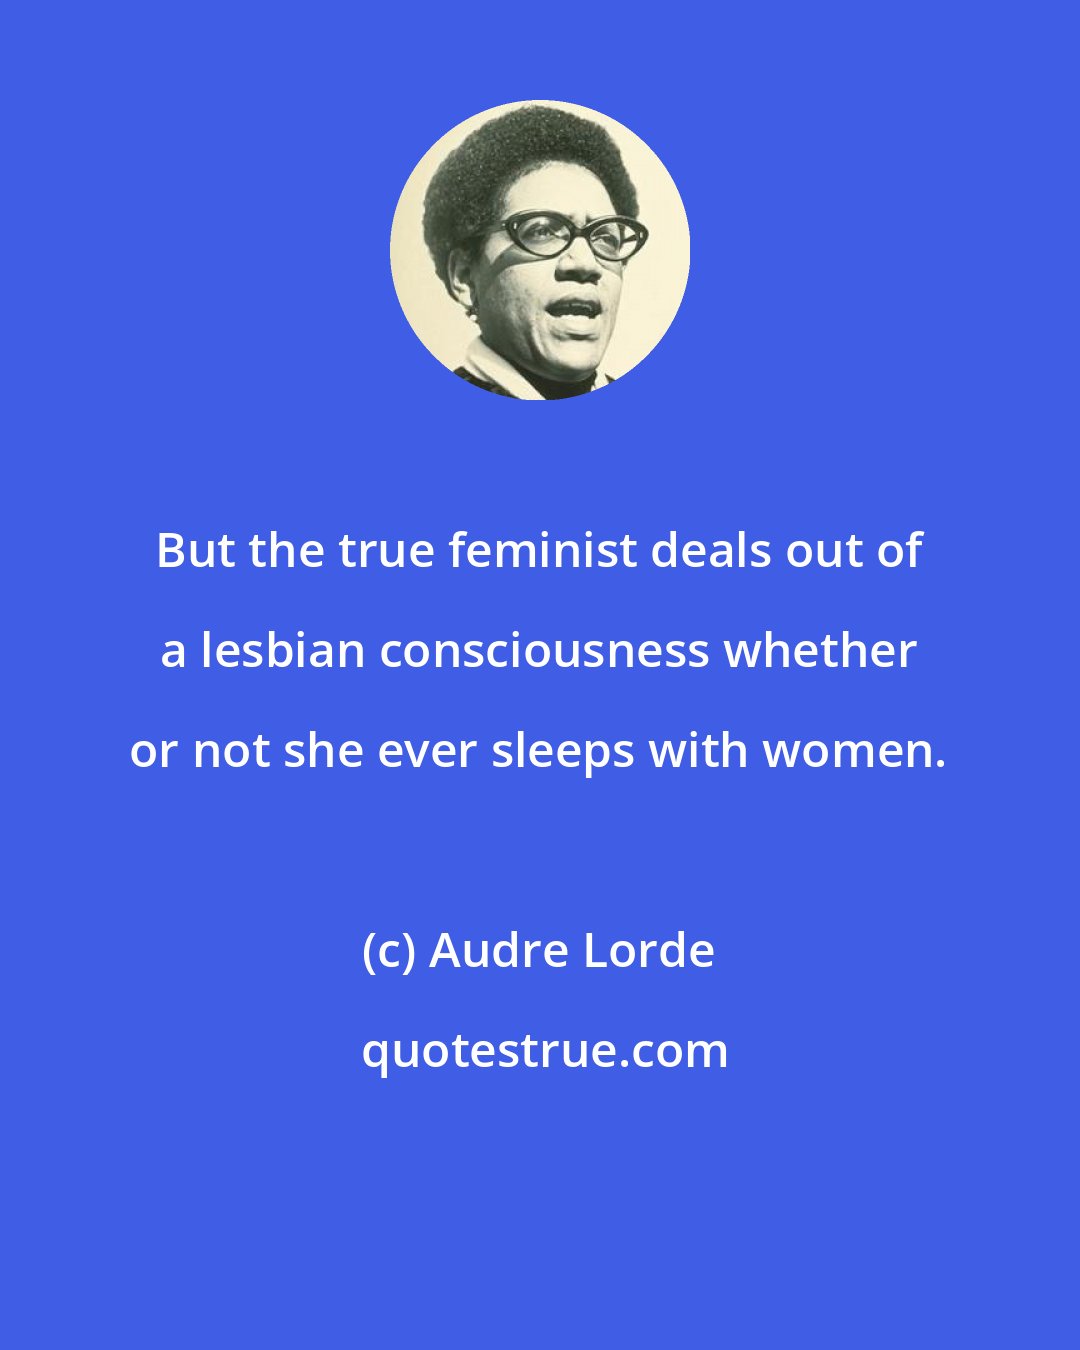 Audre Lorde: But the true feminist deals out of a lesbian consciousness whether or not she ever sleeps with women.